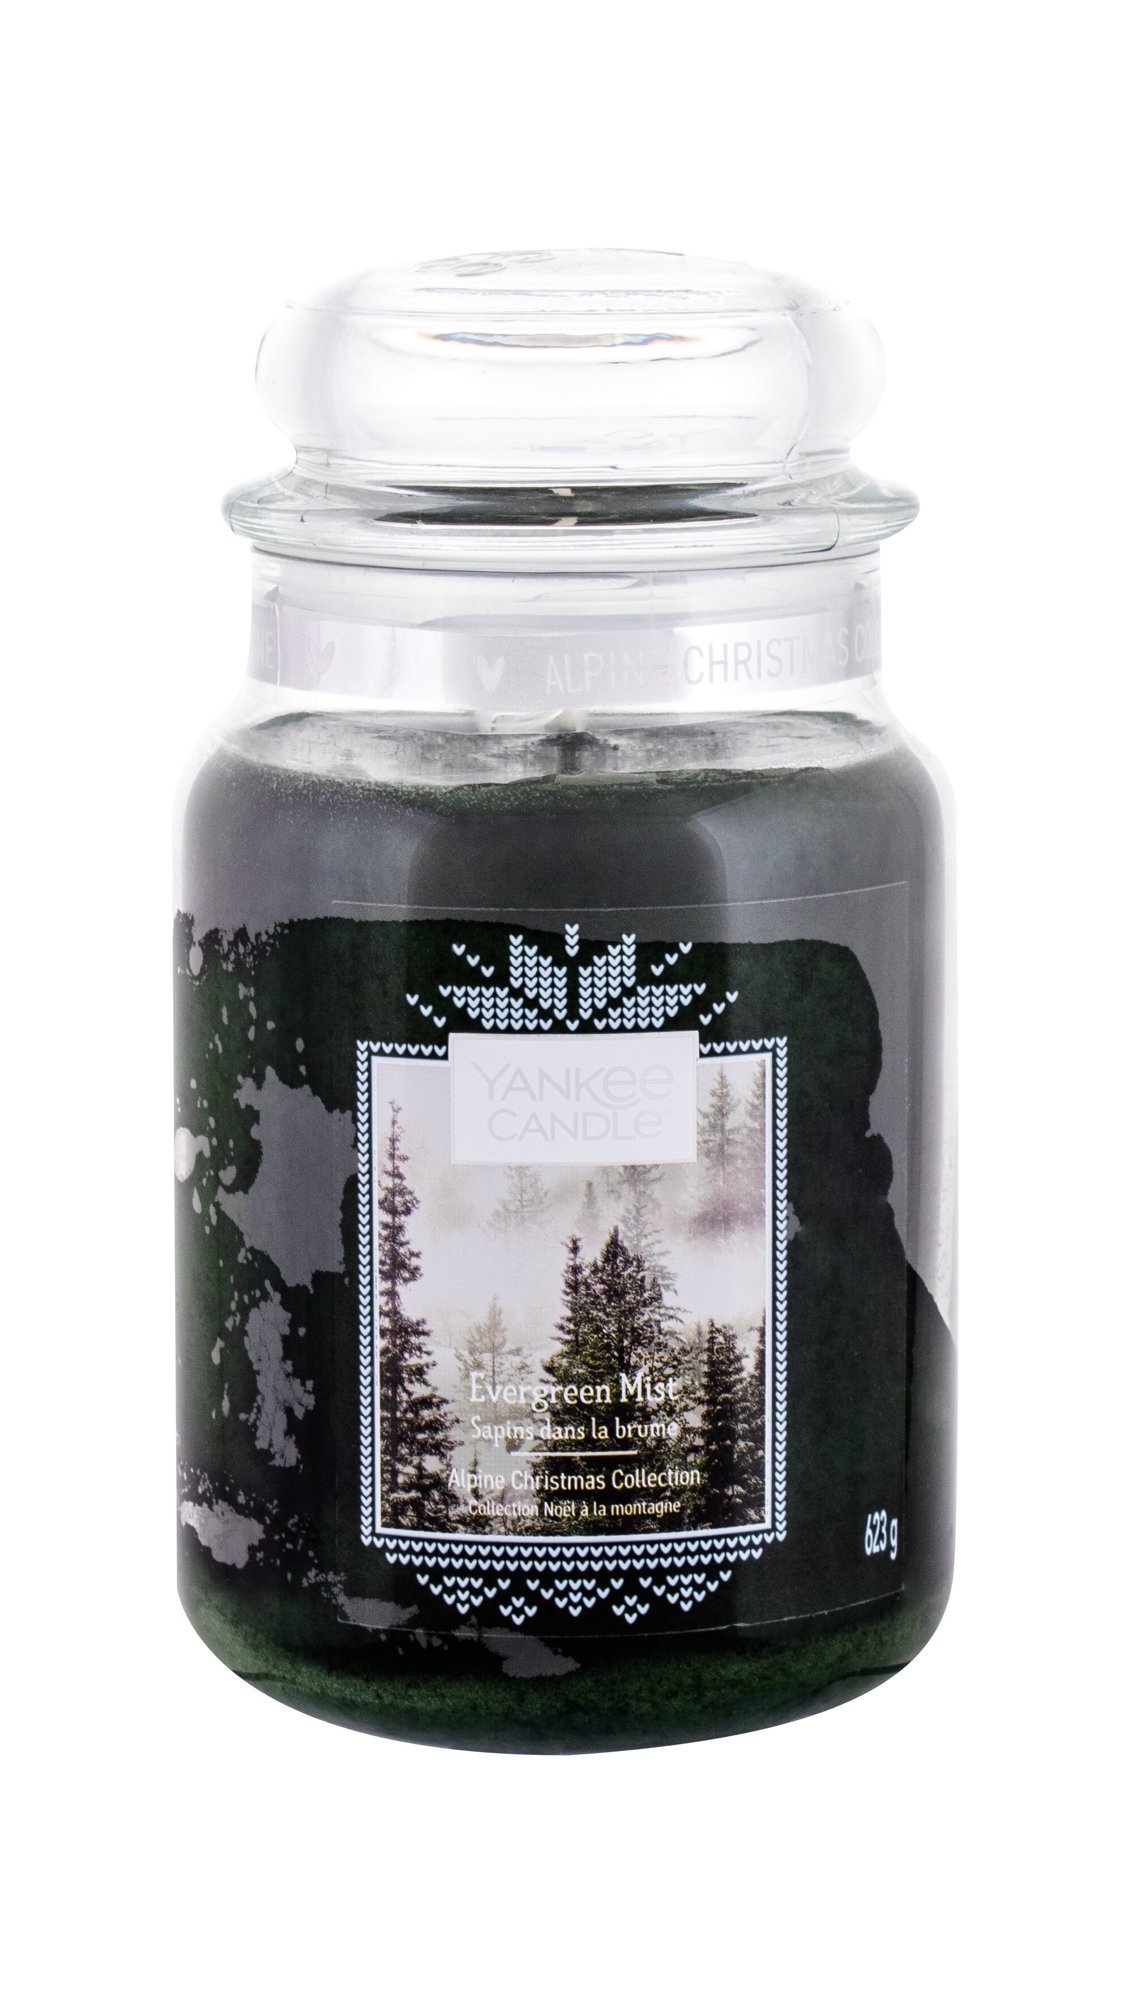 Yankee Candle Evergreen Mist 623g Kvepalai Unisex Scented Candle